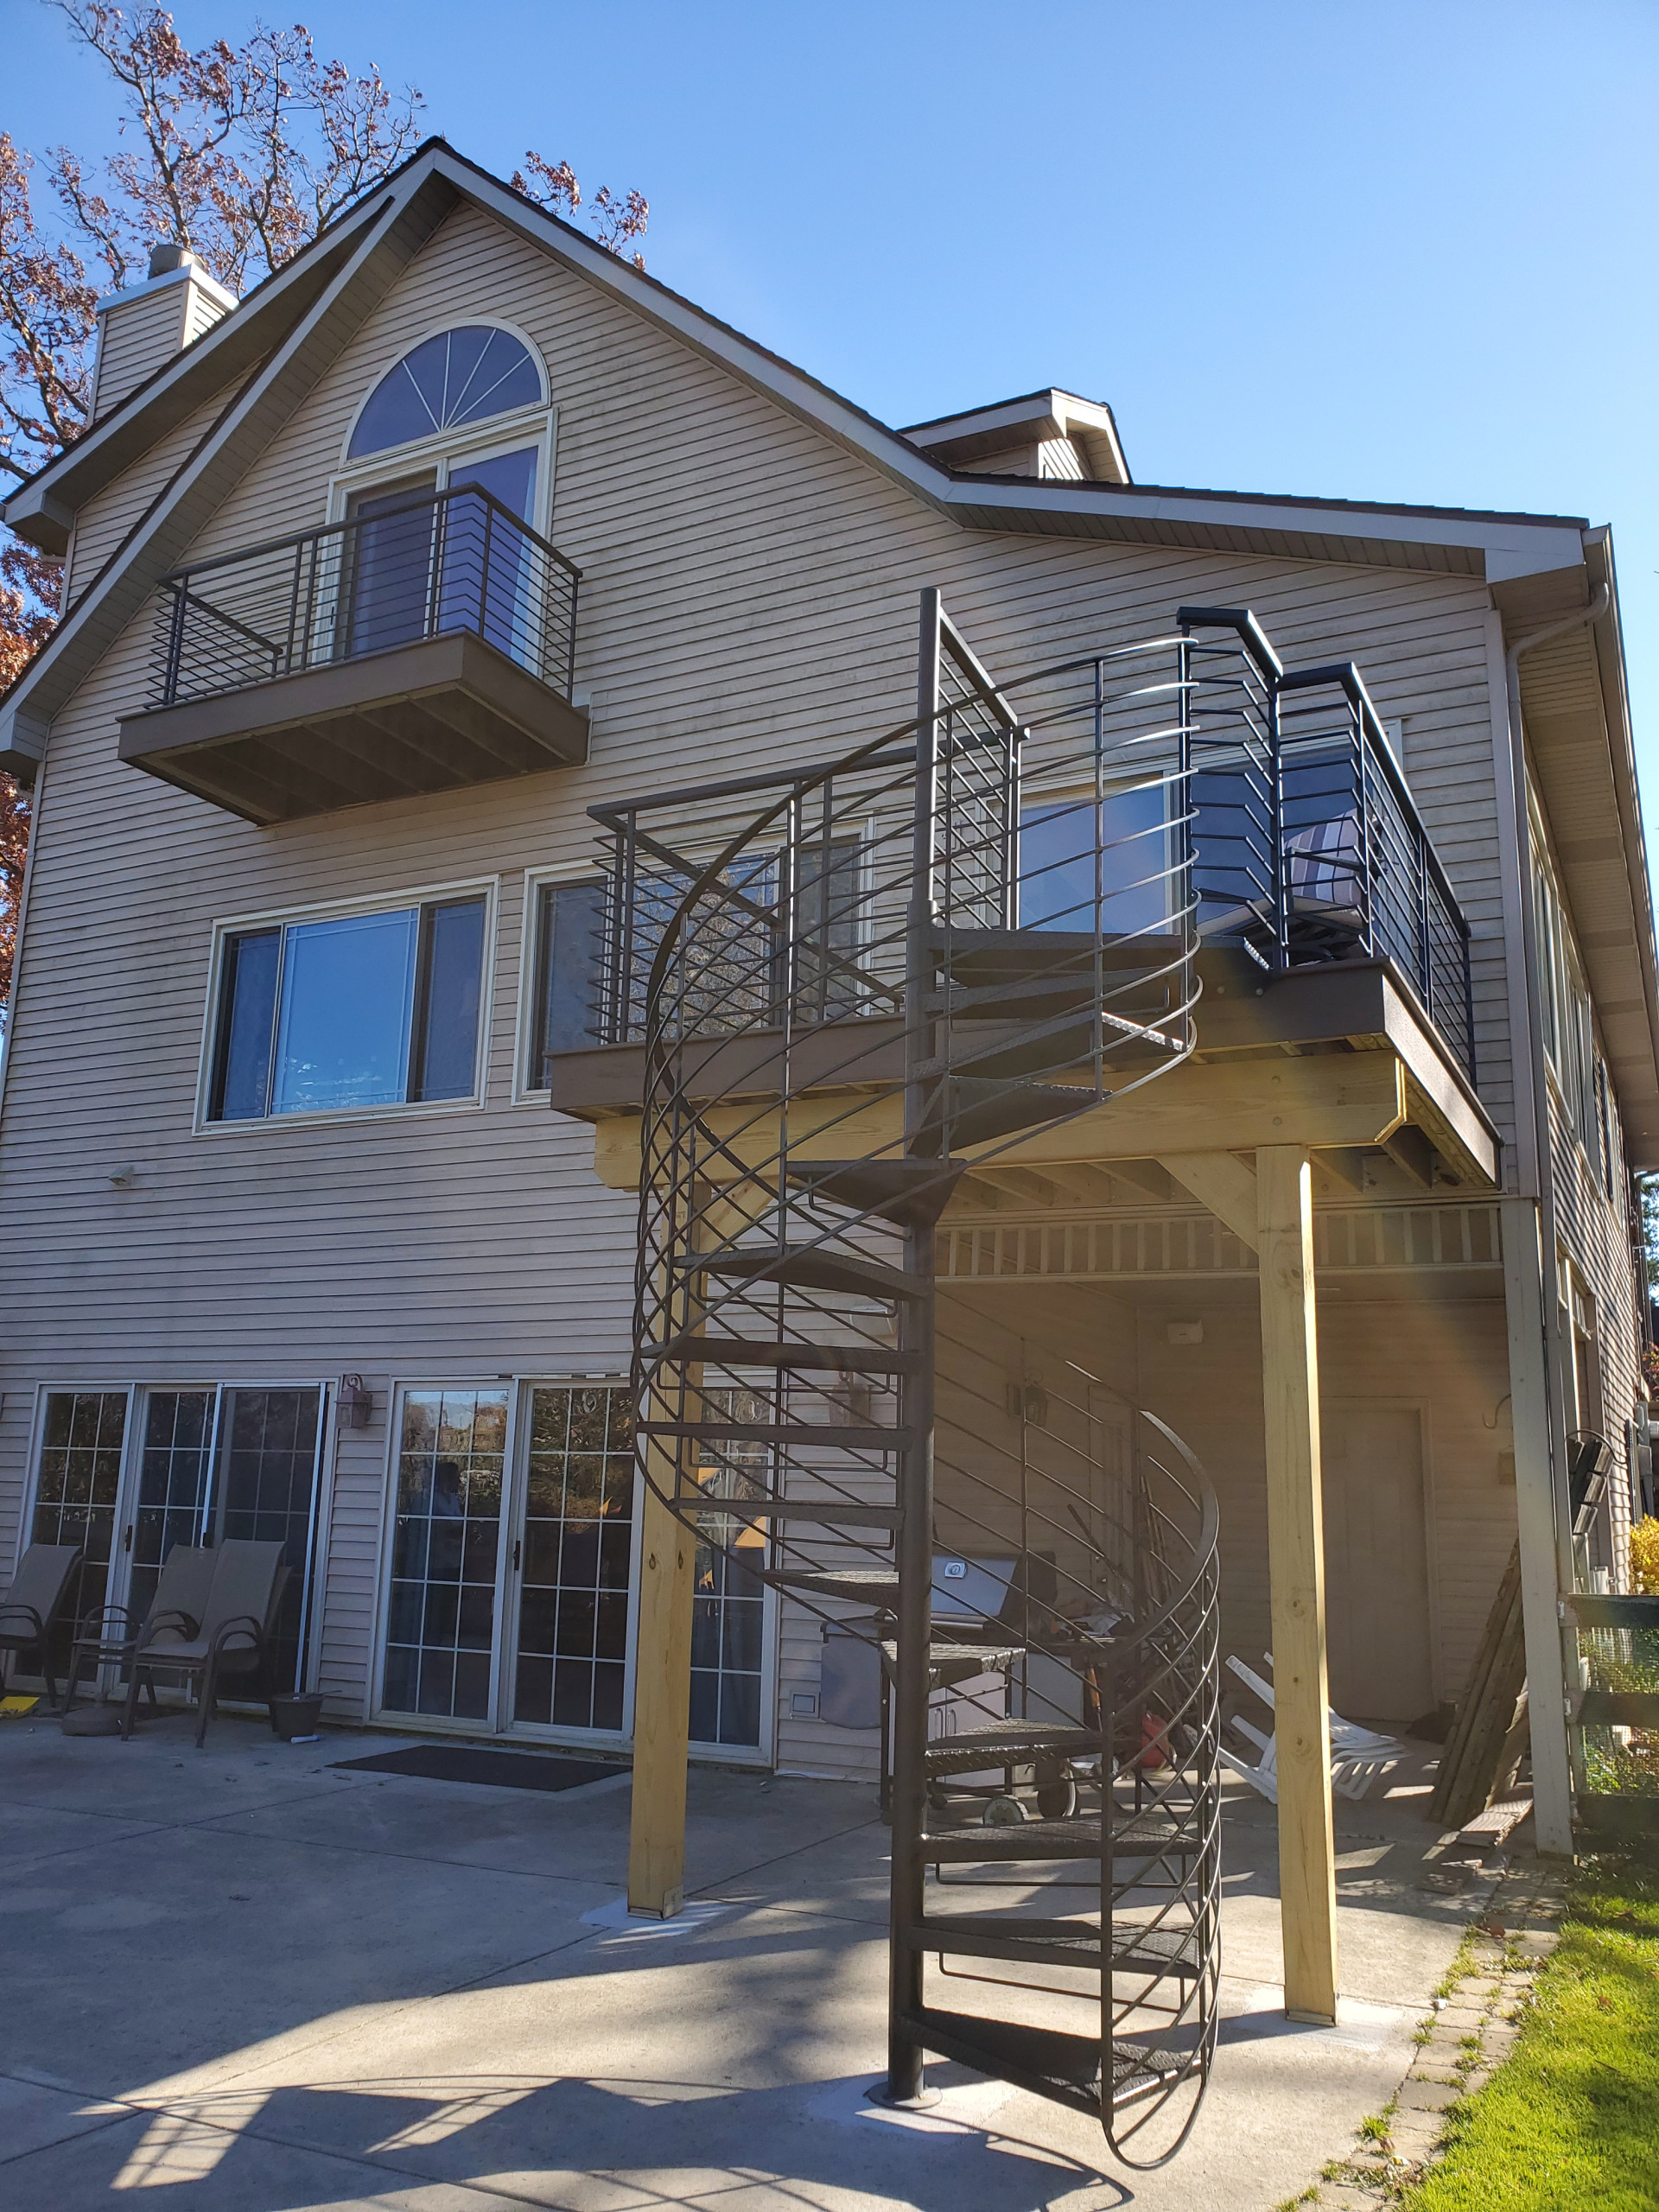 Composite deck with spiral staircase